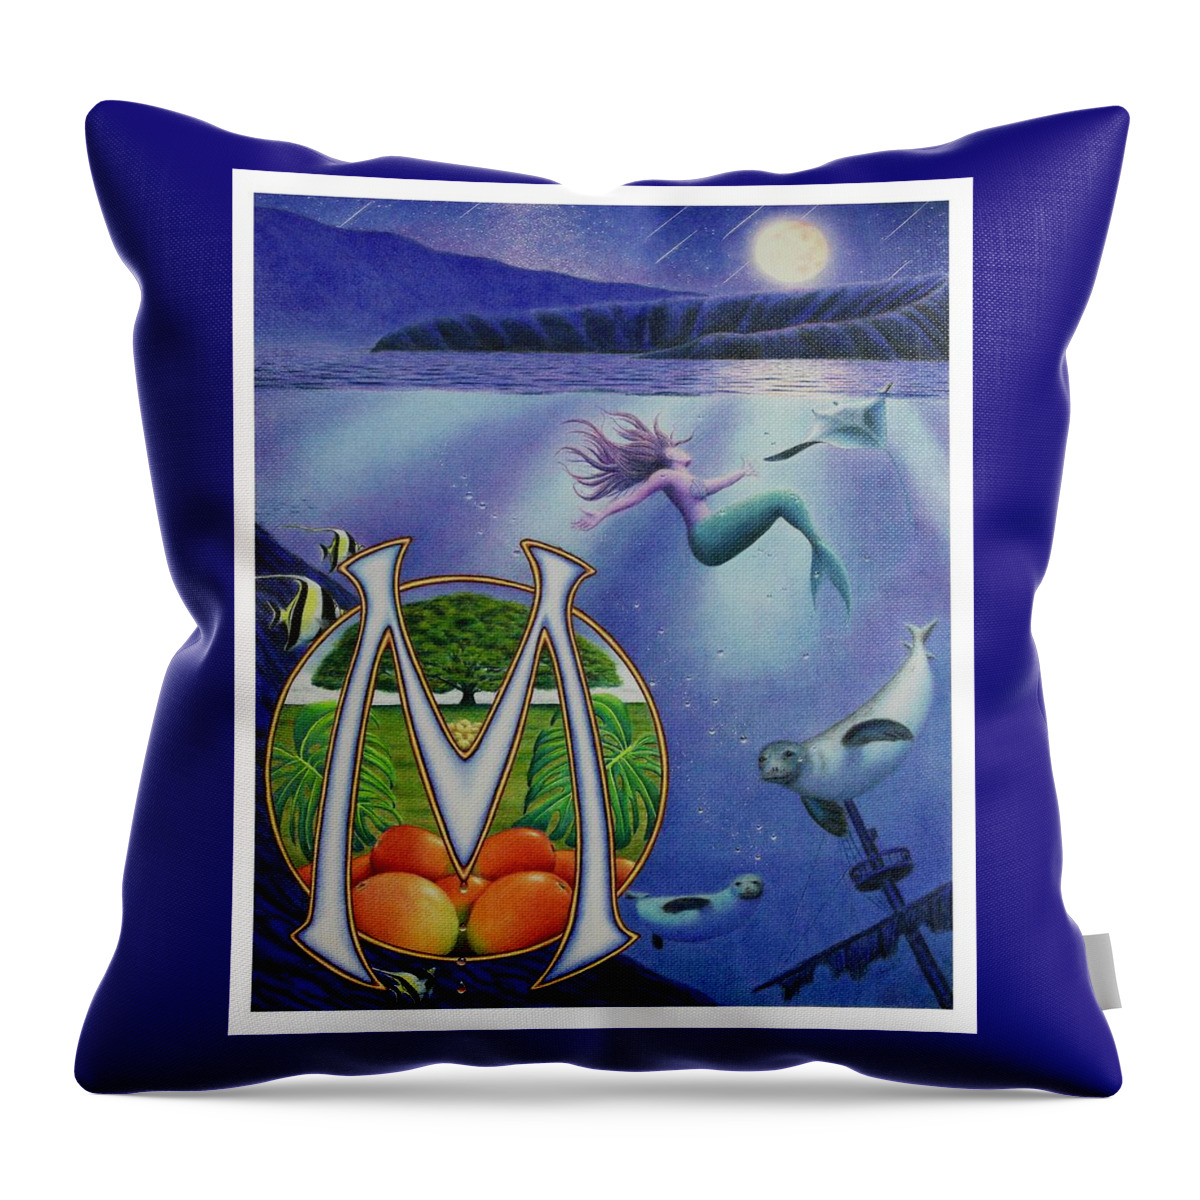 Kim Mcclinton Throw Pillow featuring the drawing M is for Monk Seal by Kim McClinton